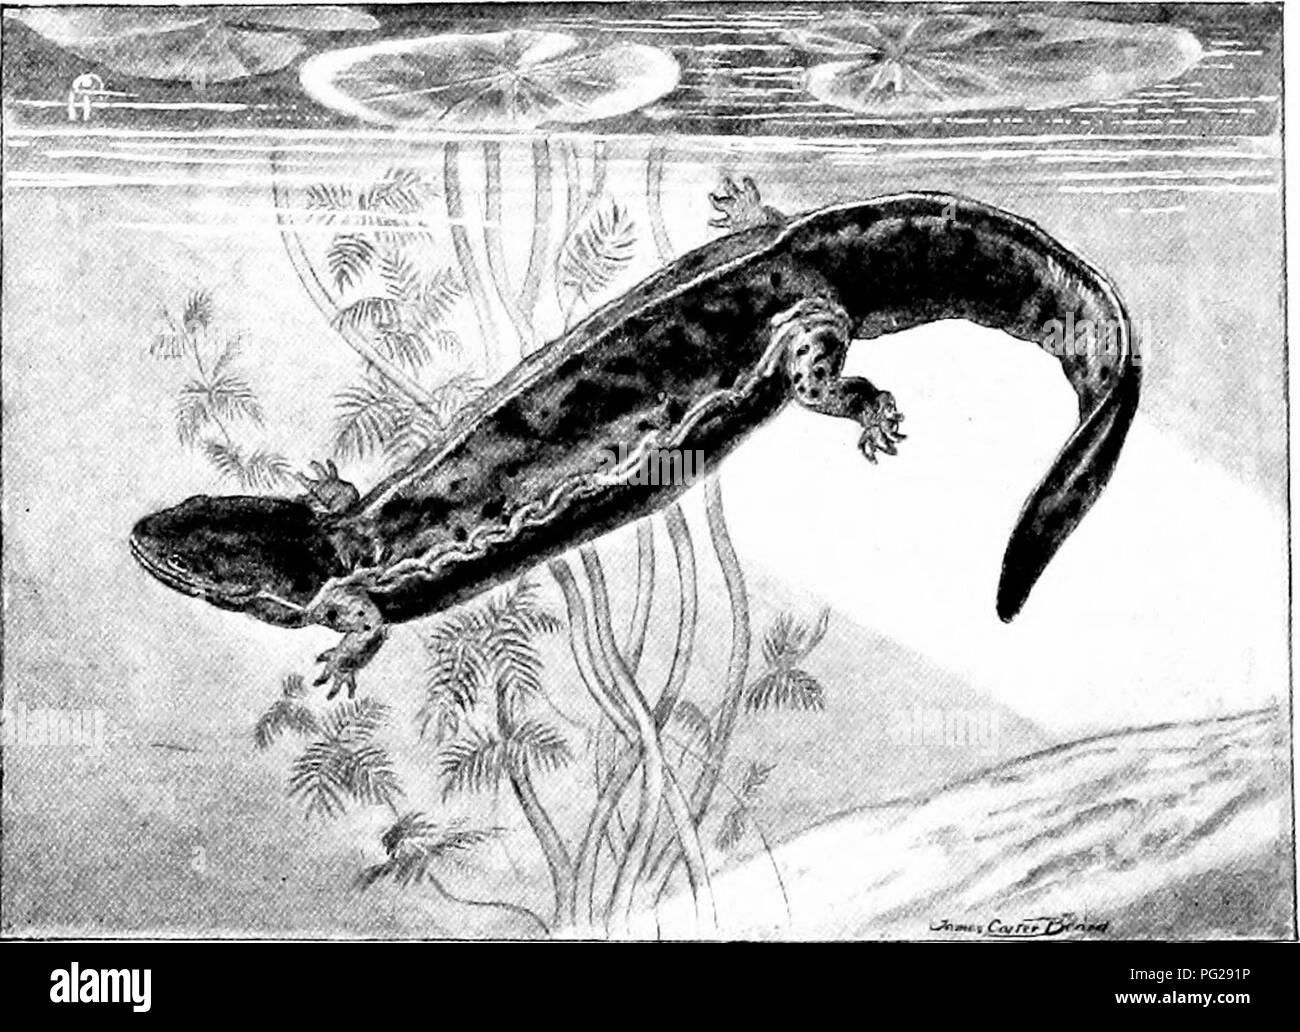 . The American natural history; a foundation of useful knowledge of the higher animals of North America. Natural history. 368 ORDERS OF AMPHIBIANS—TAILED AMPHIBIANS and the swift-running streams of the Dusky Salamander.^ Very frequently, salamanders are found un- derneath fallen trees, or stones, or under the bark of decaying logs; and on the western prairie farms the plough-share turns into the broad light of day many a burrowing amphibian. On the whole, the Spotted Salamander- ap- pears to be the best species with which to intro- duce the North American group. It is distinctly marked, and of Stock Photo